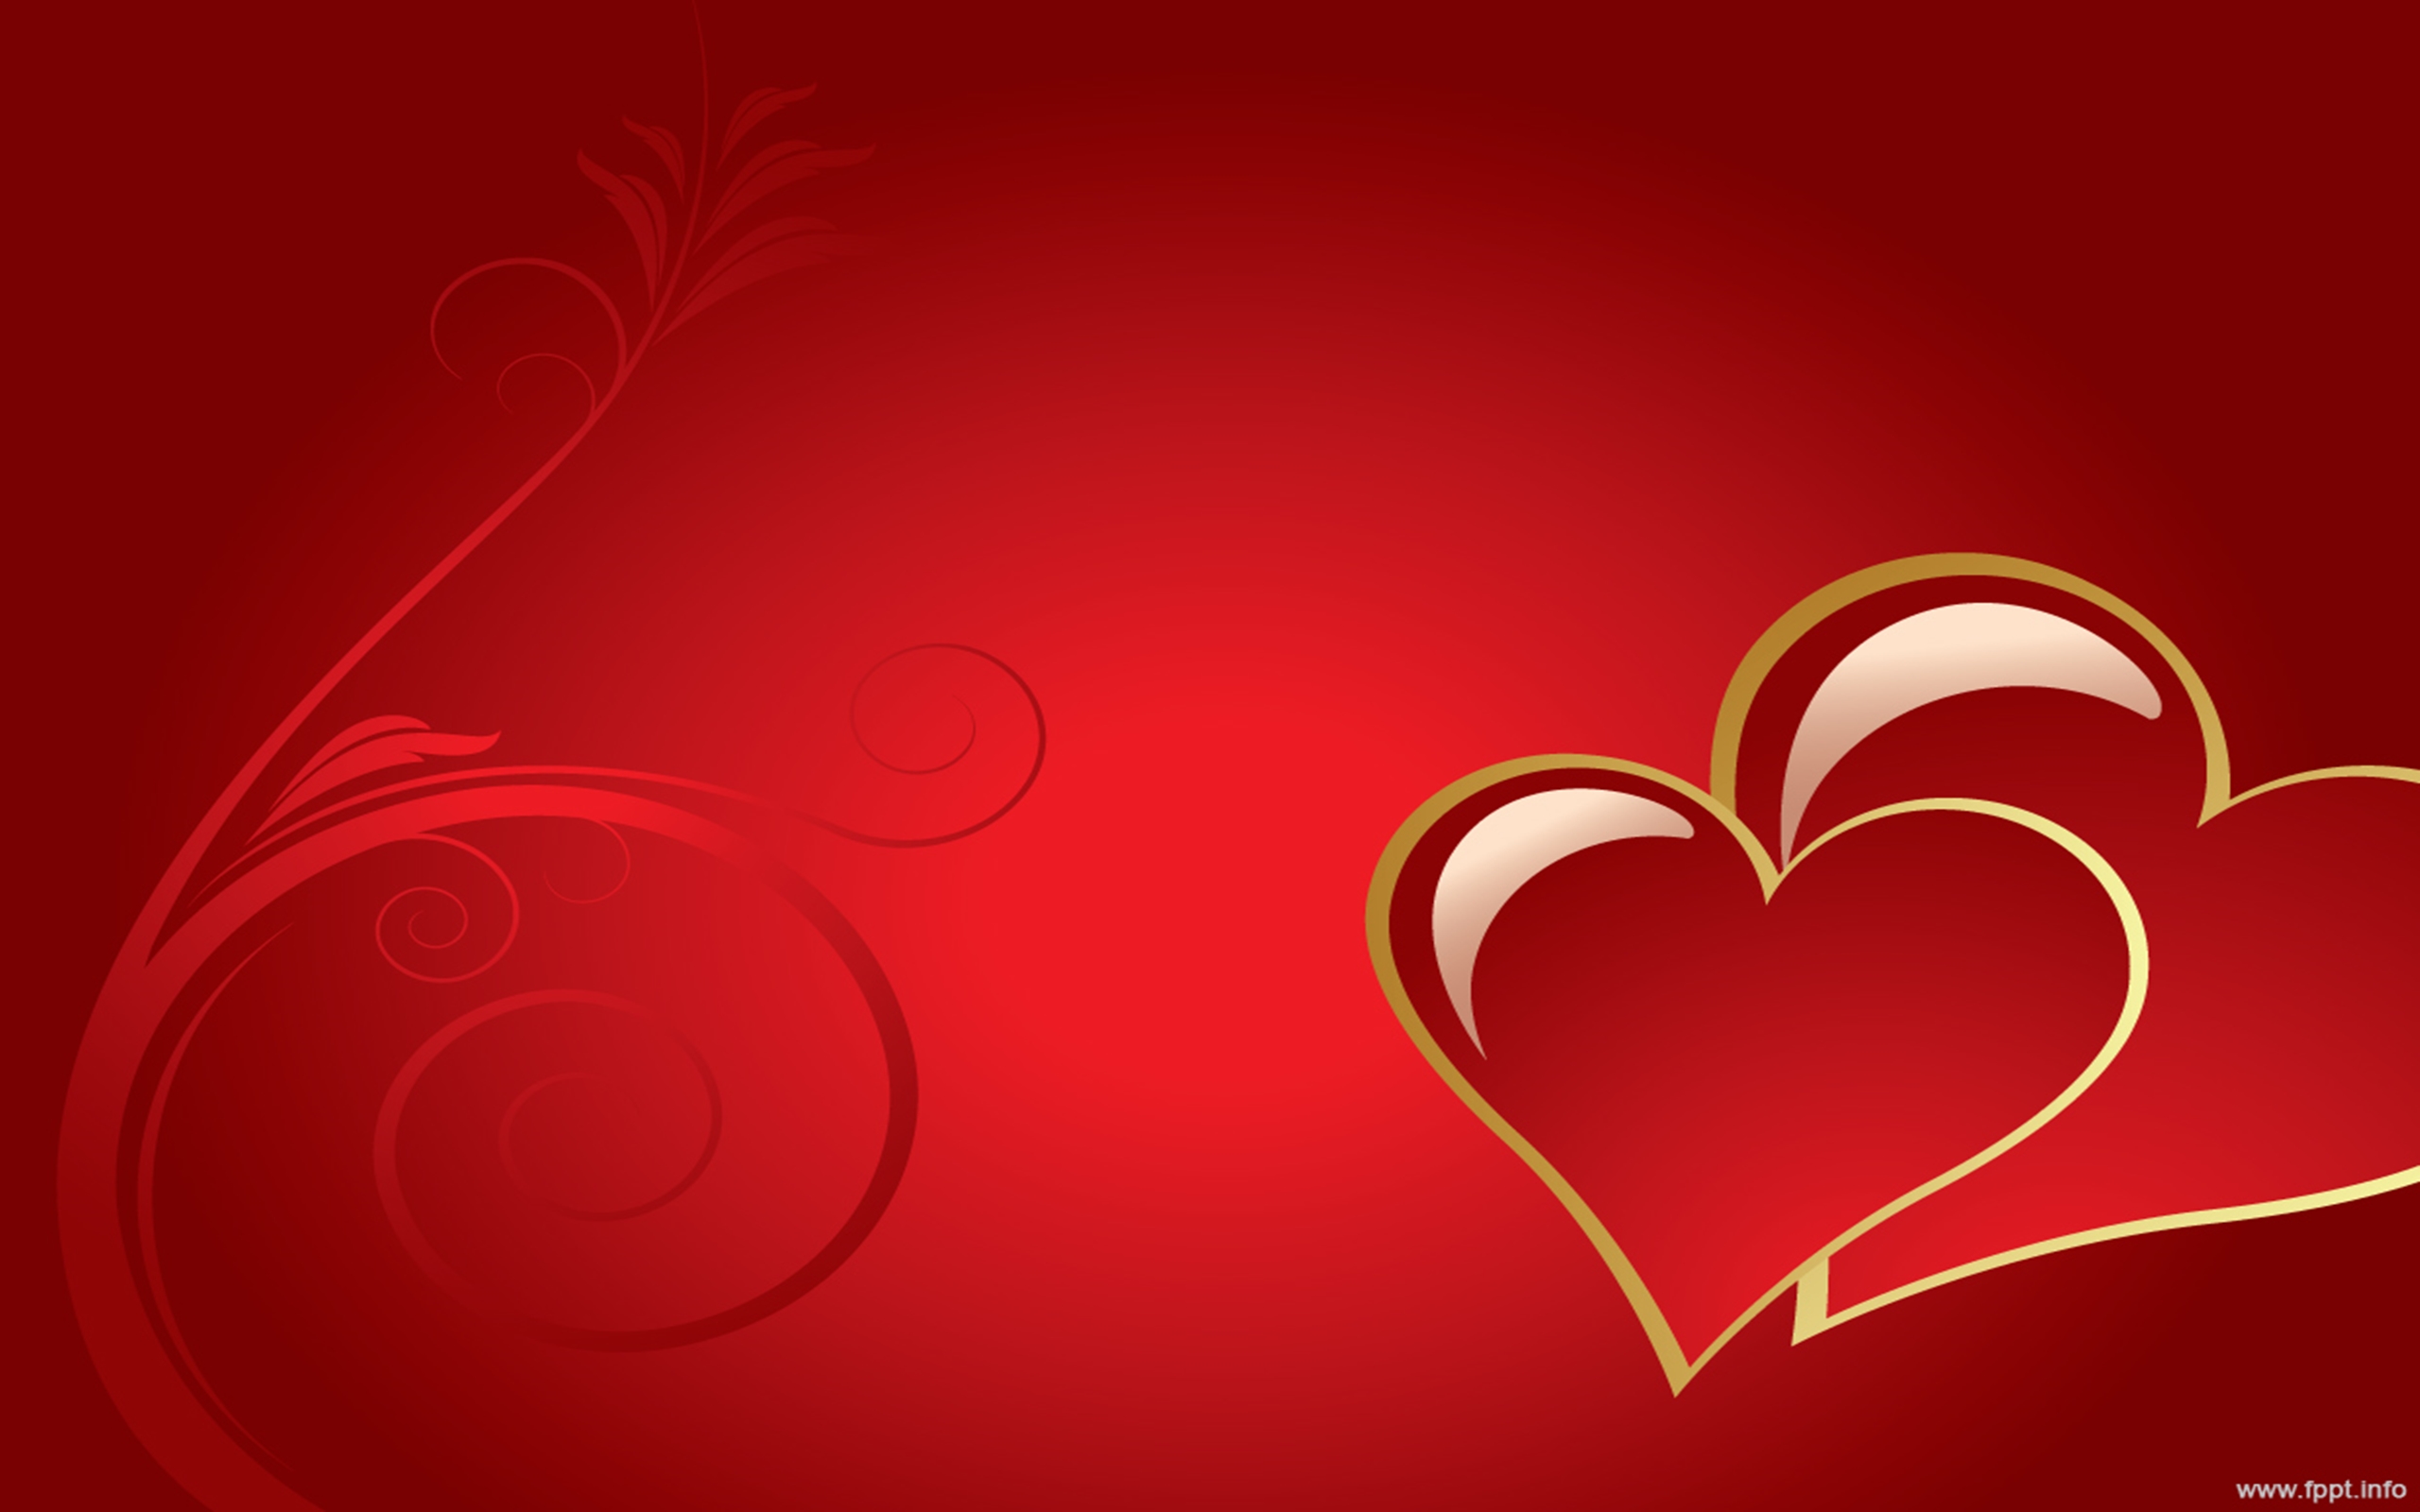 Valentine's Day Hearts Red Wallpaper Hd for Desktop : 